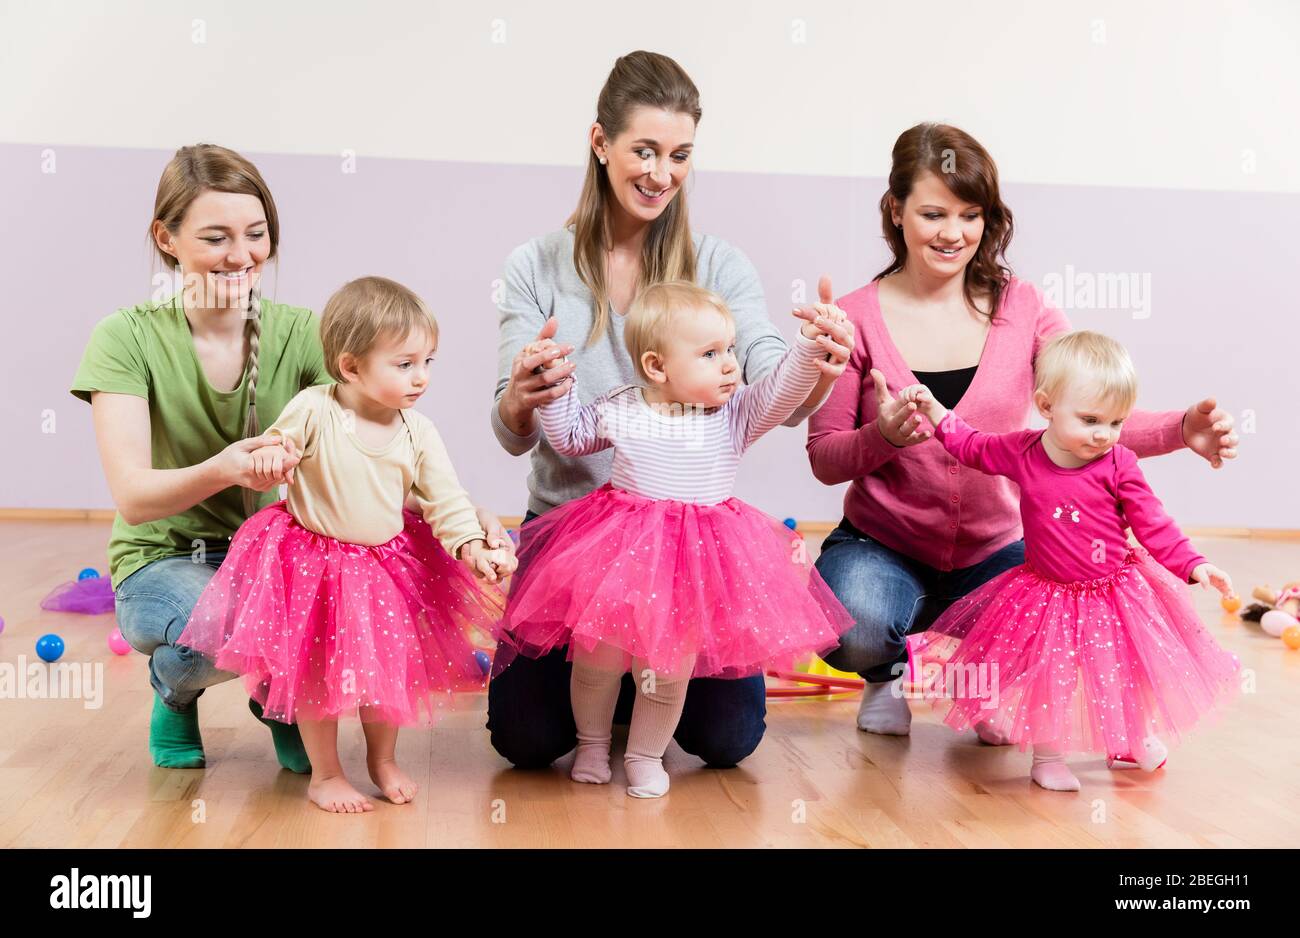 Three baby girls in pink skirts learning to walk Stock Photo